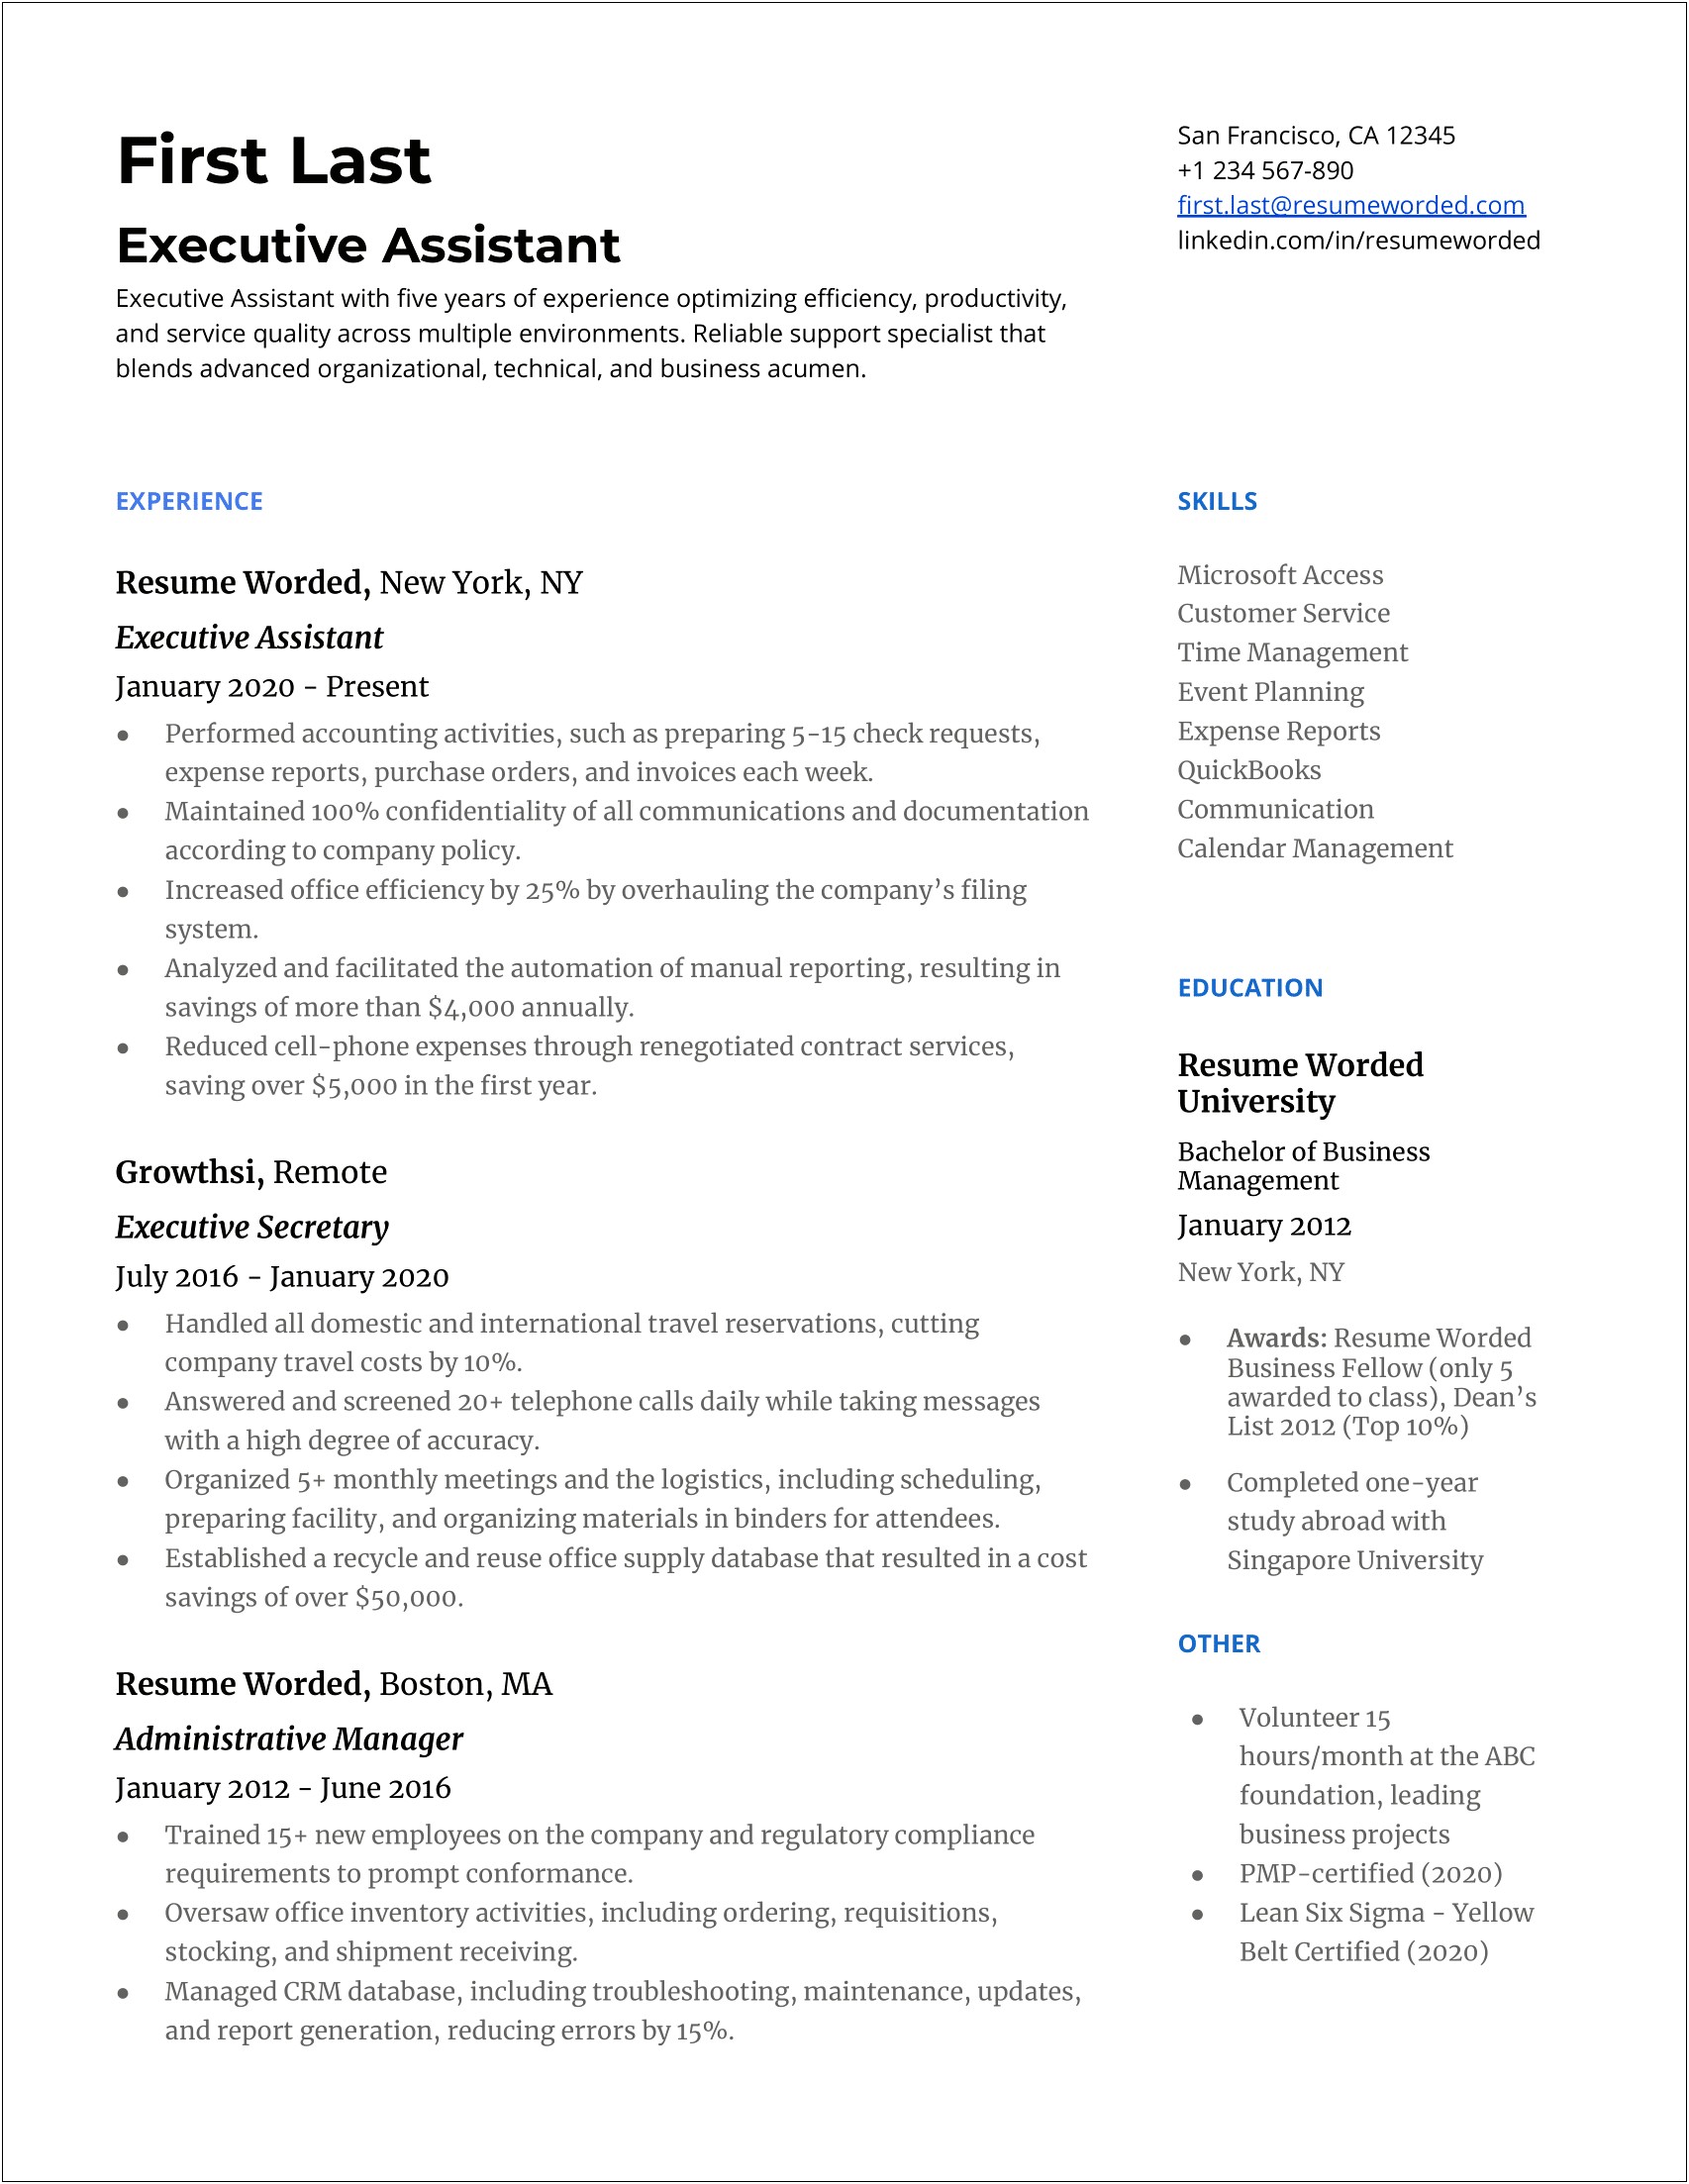 Sample Resume For Experience Customer Service Manager